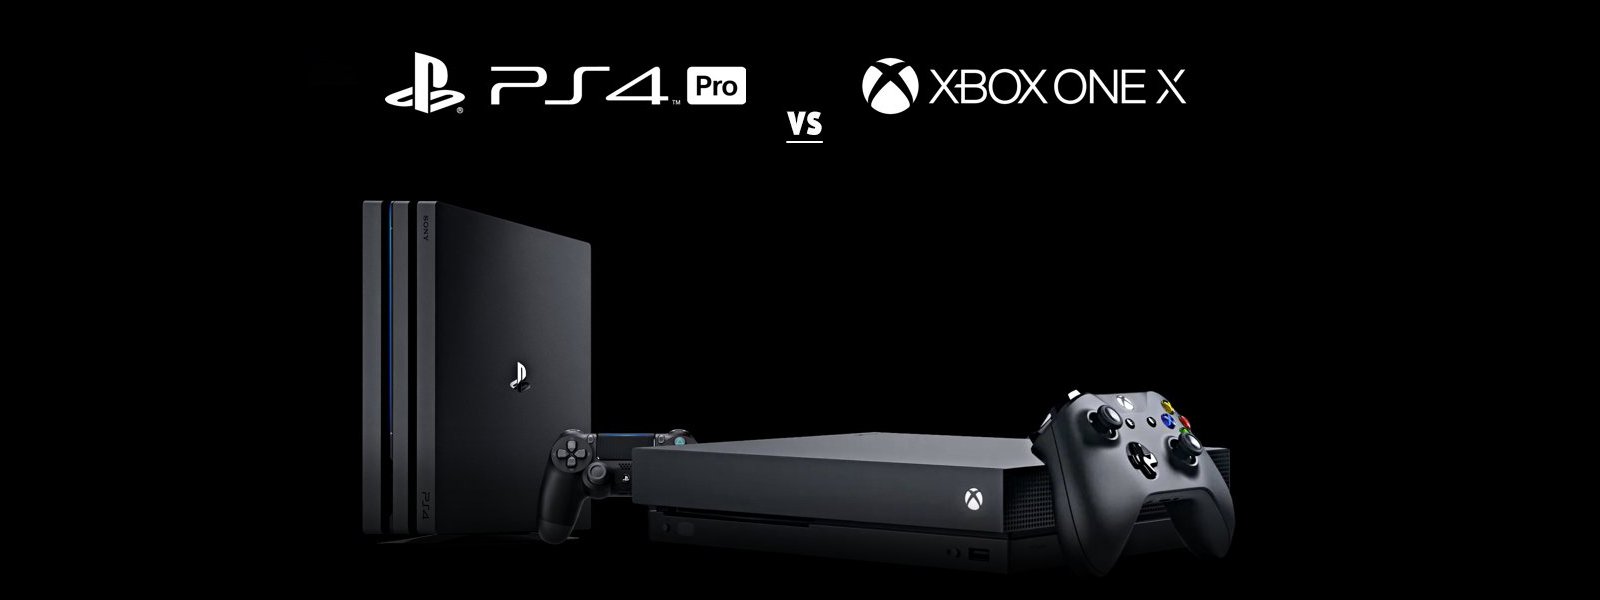 Xbox One X Vs PS4 Pro 4K HDR Gaming Console Reigns Supreme?